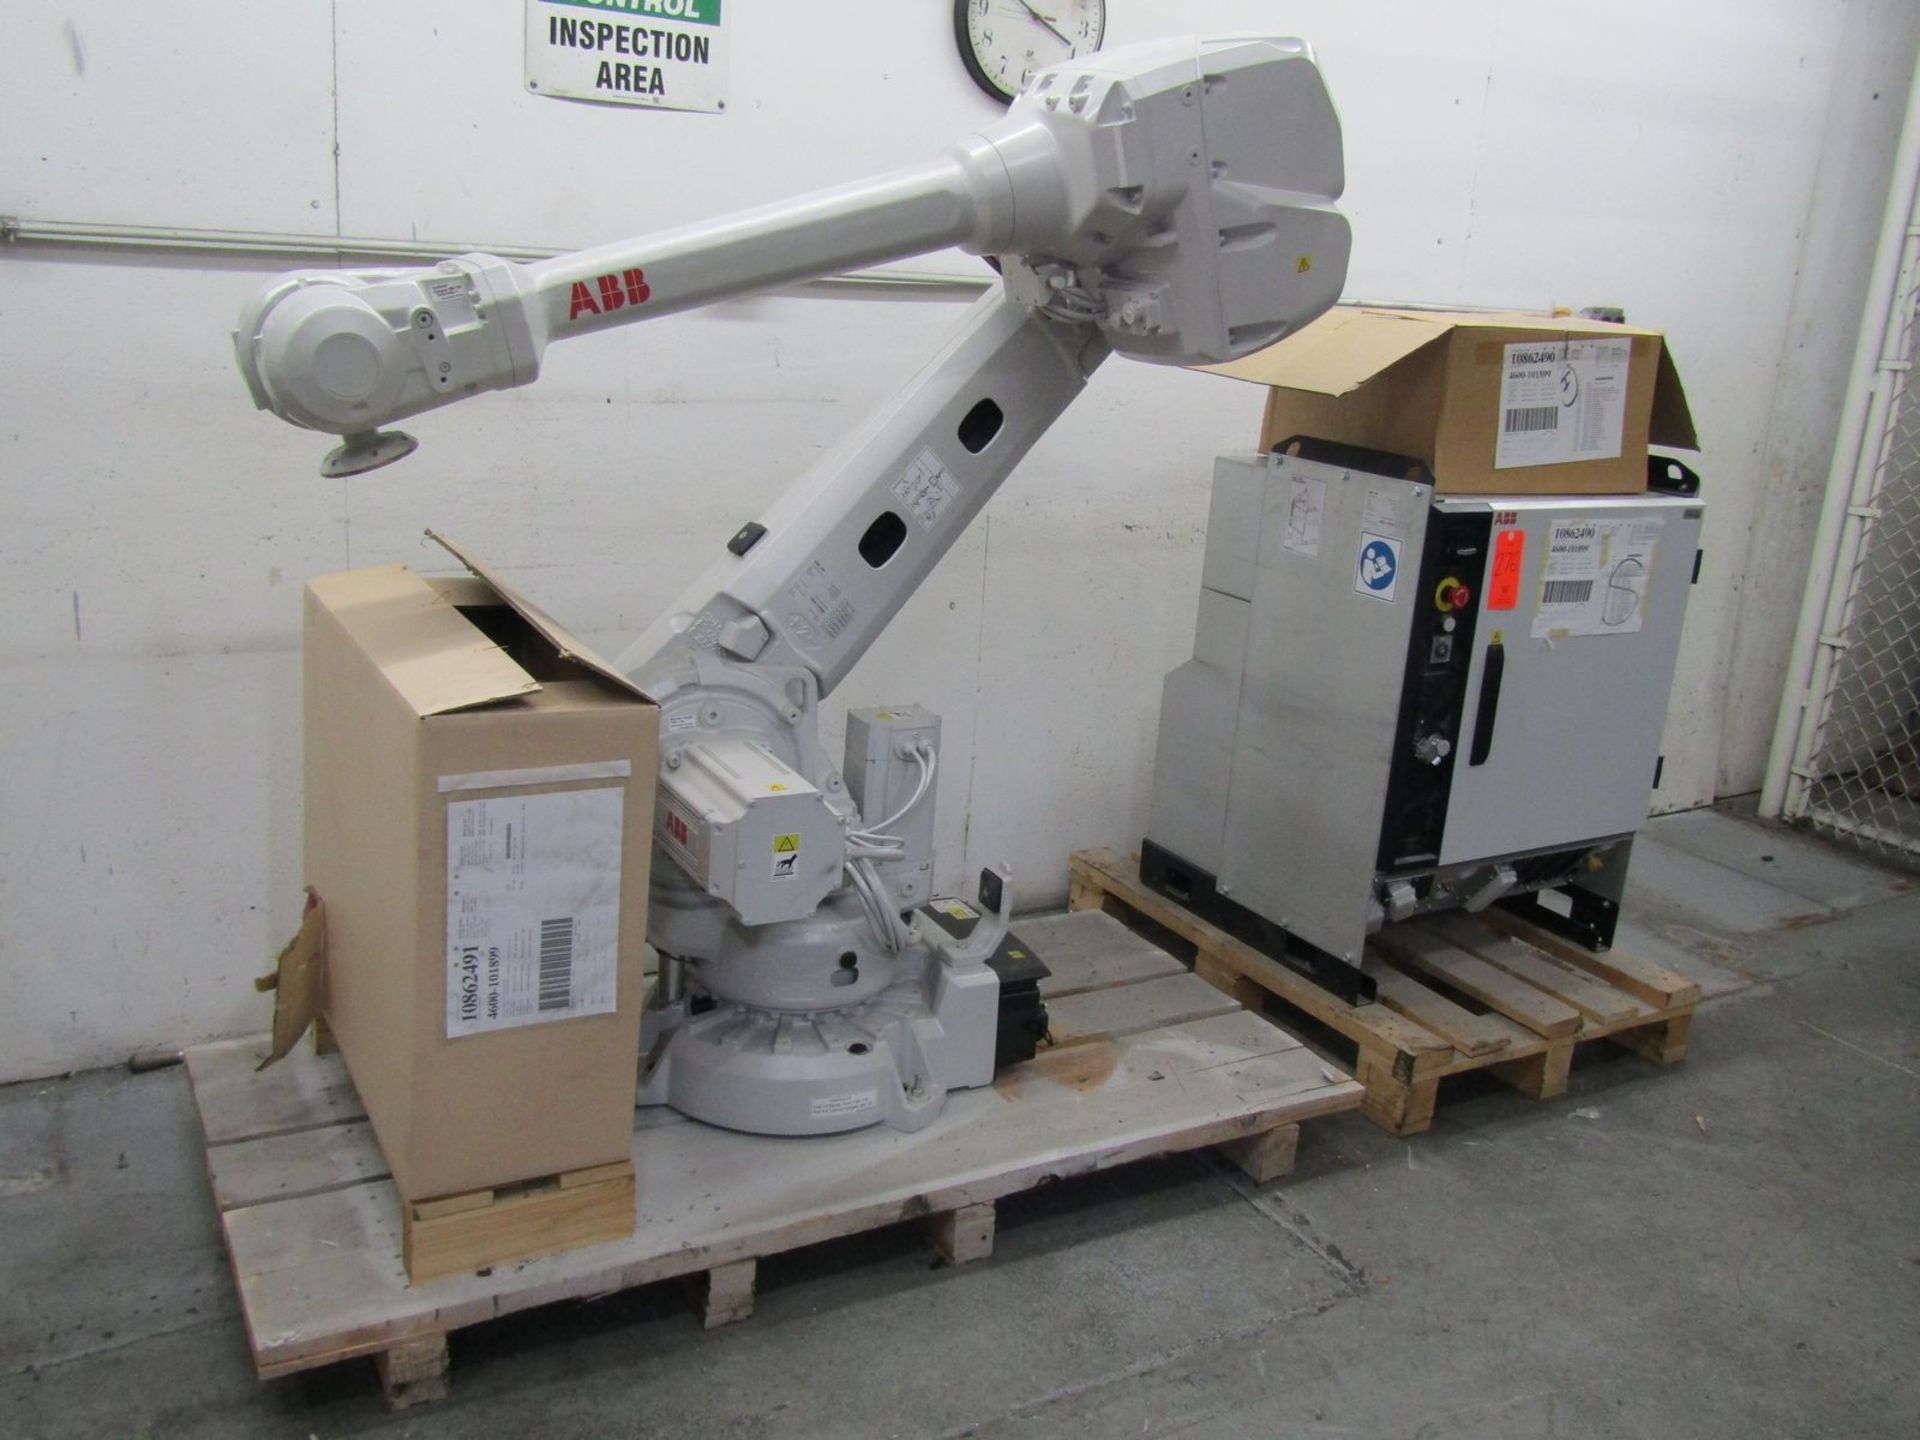 ABB 1,000 kG Load Capacity Model IRB4600 M2004 Robot, S/N: 4600-101899 (2014); with ABB Type IRC5